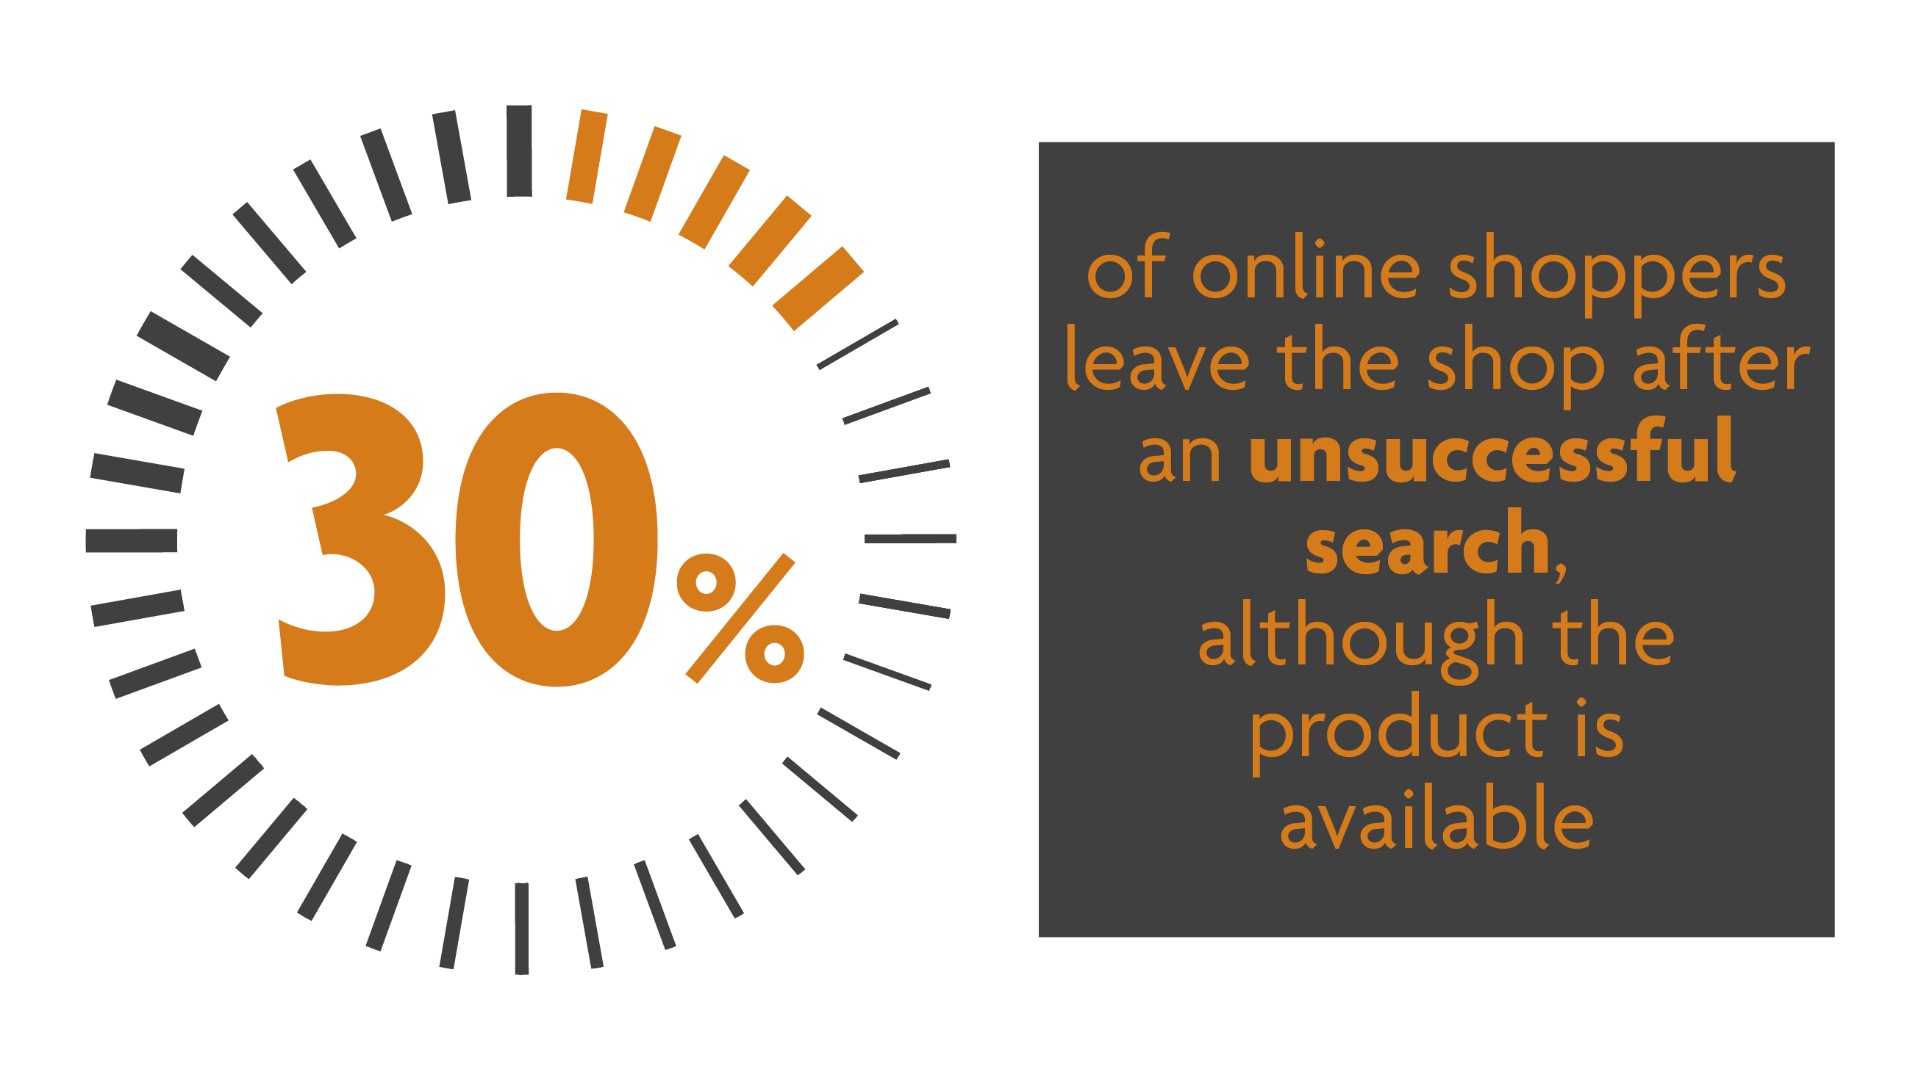 30% of online shoppers leave the shop after an unsuccessful search, although the product is available